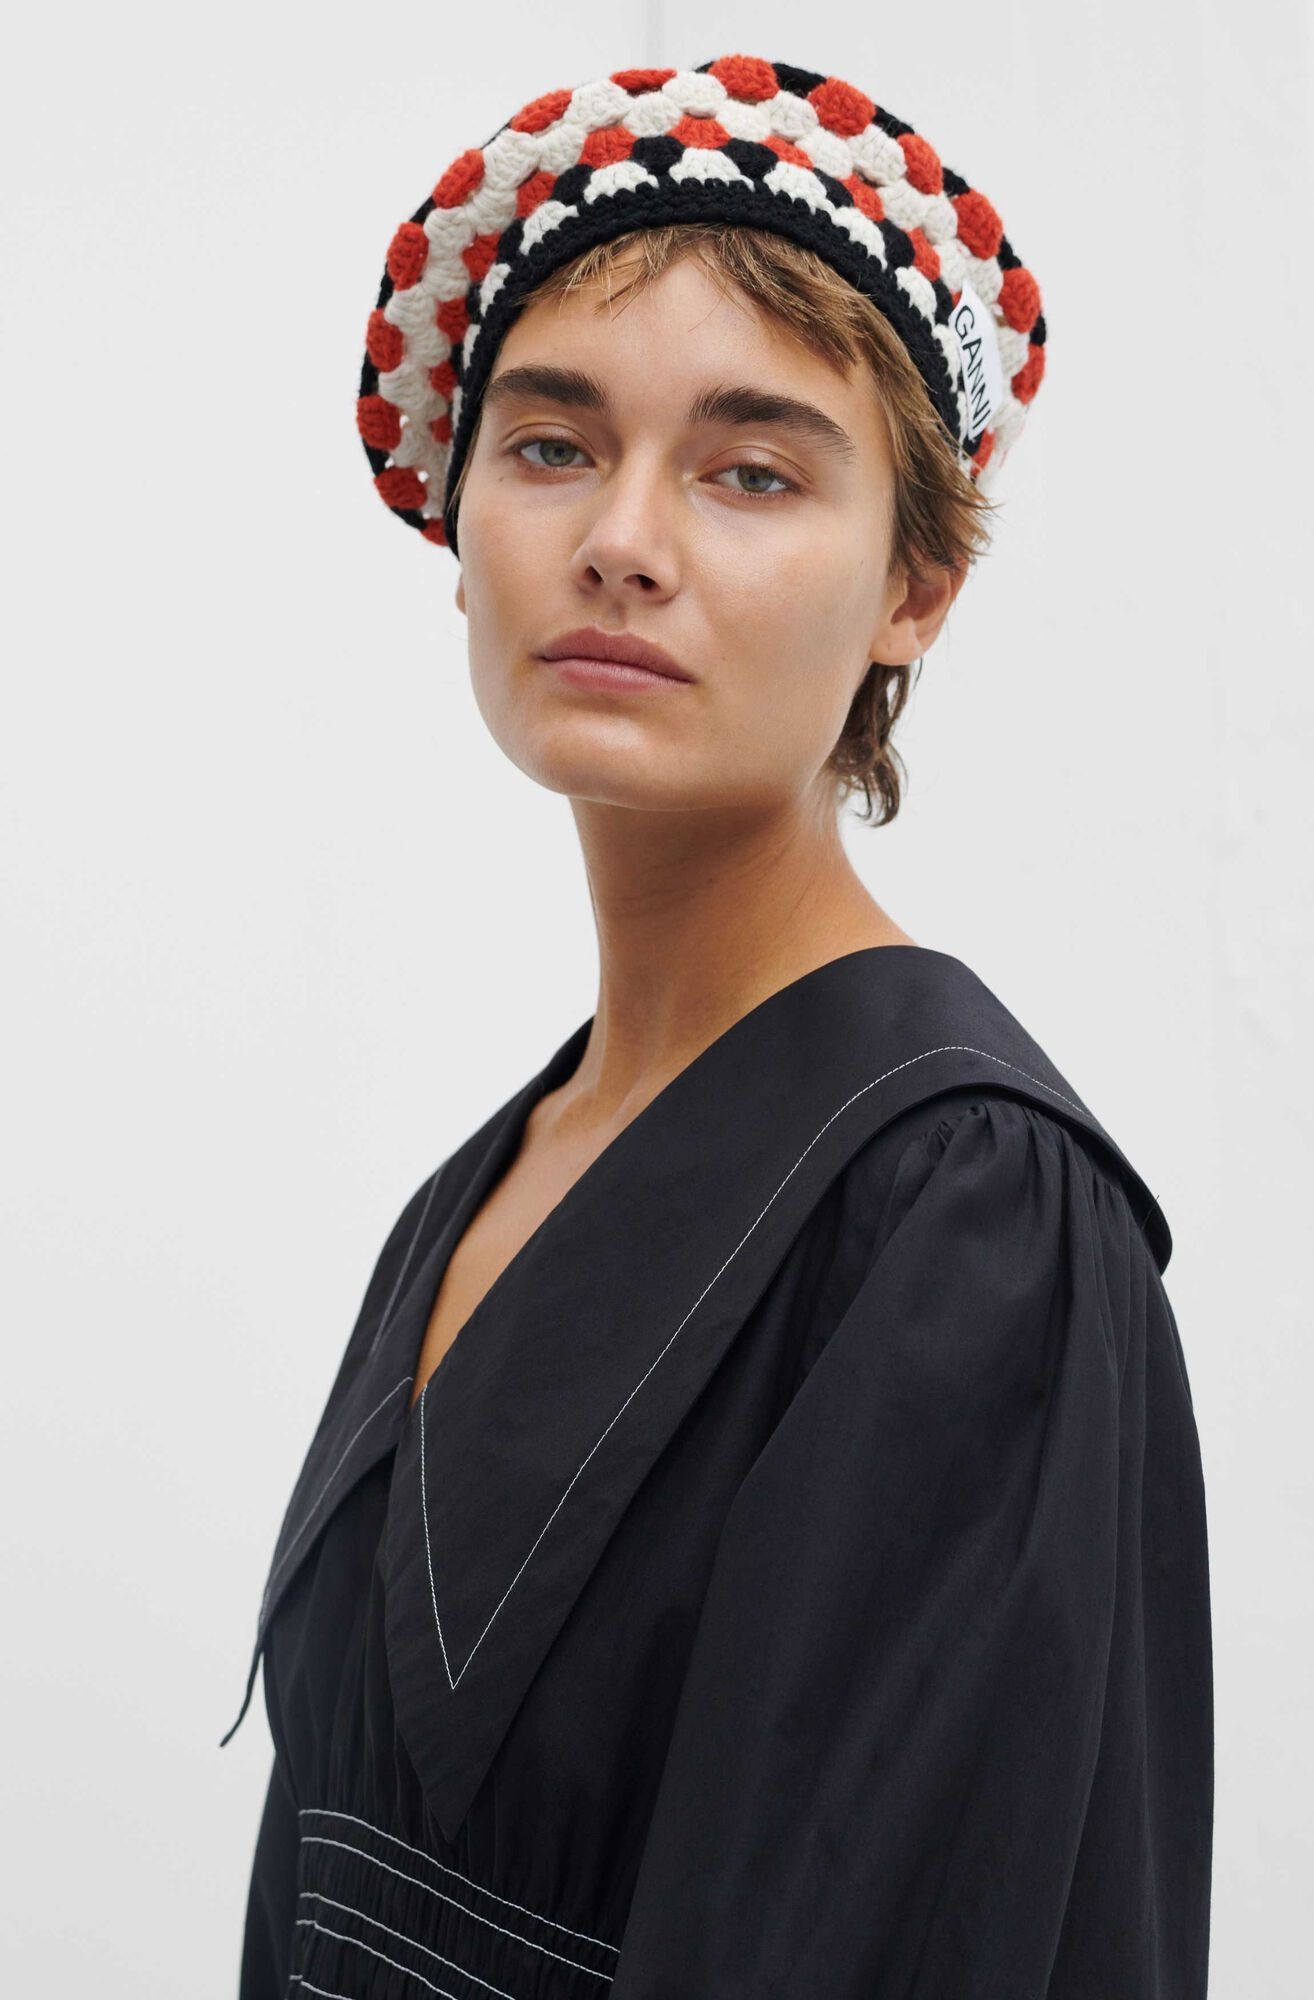 Bring on the beret - expert tips on how to wear the chicest hat